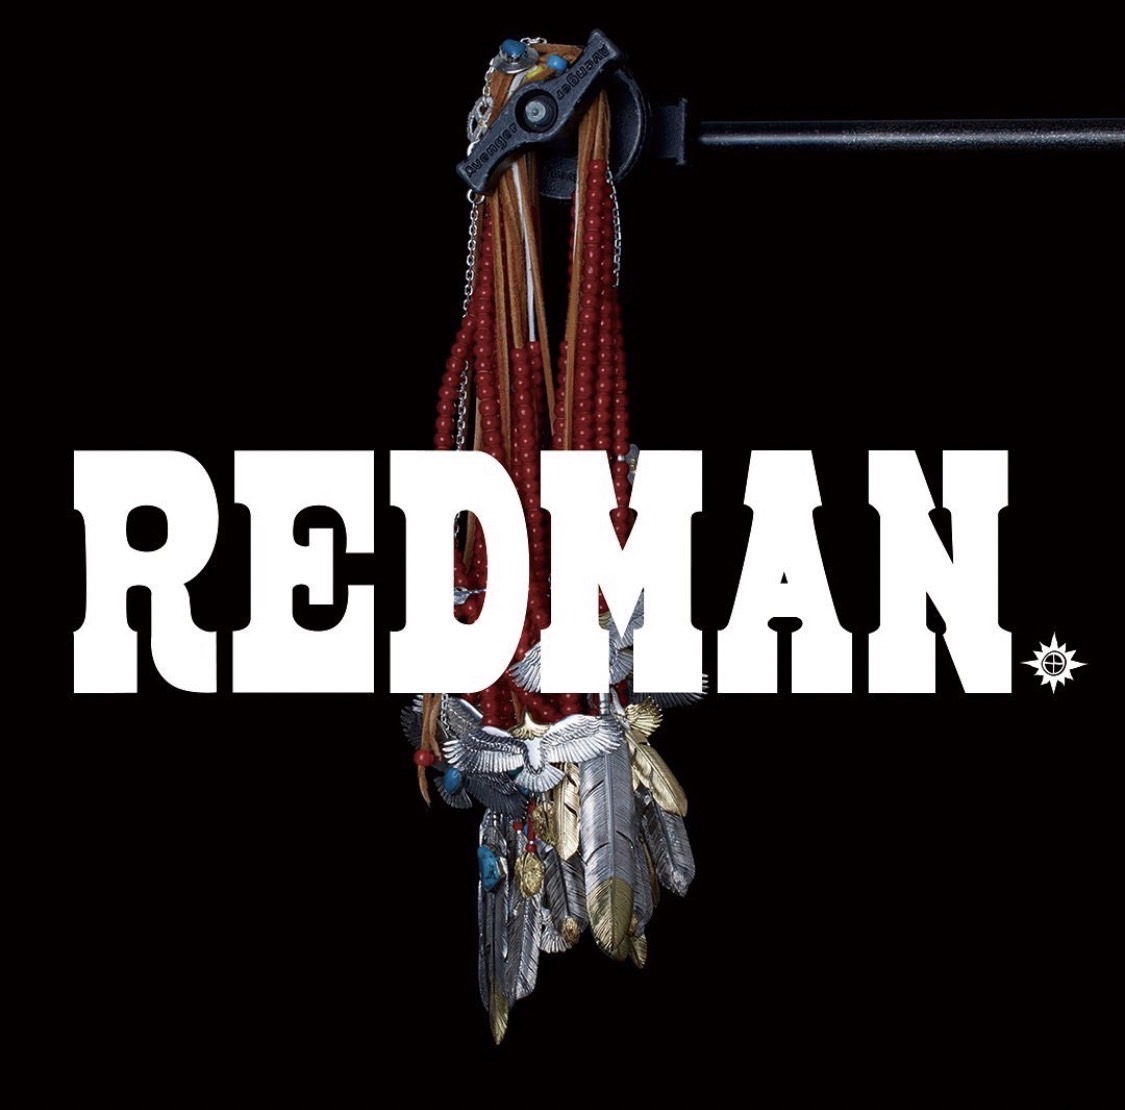 REDMAN.TRUNK SHOW NAGOYA round | JACK in the NET WEBマガジン